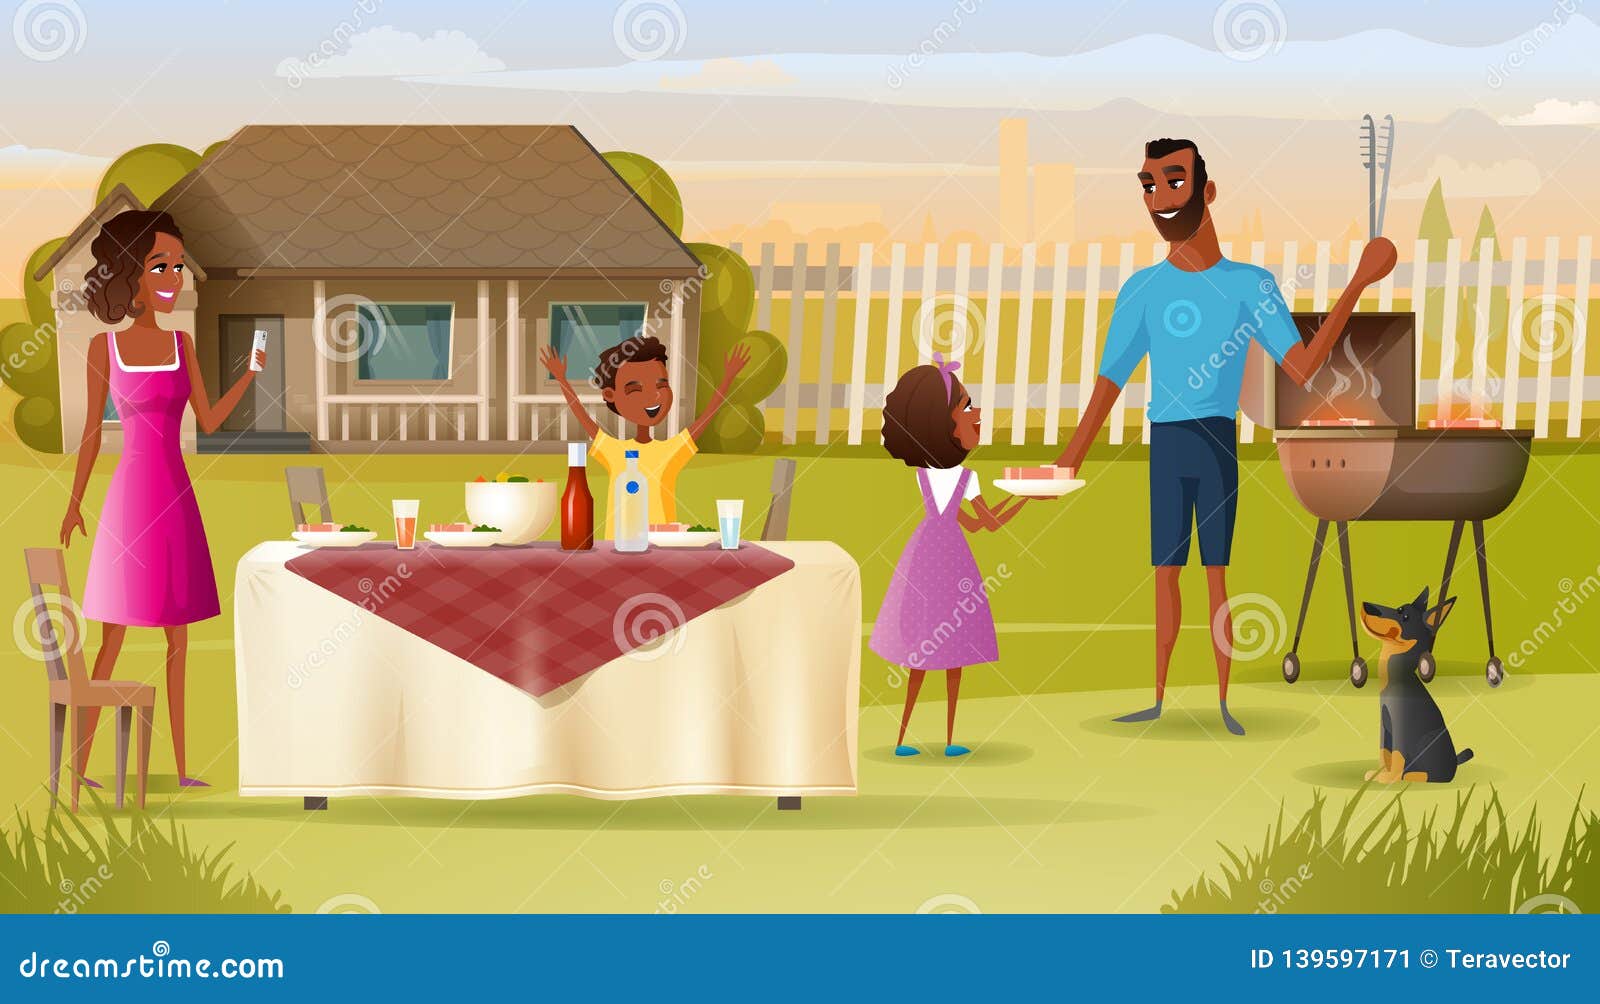 family barbeque party on house yard cartoon 